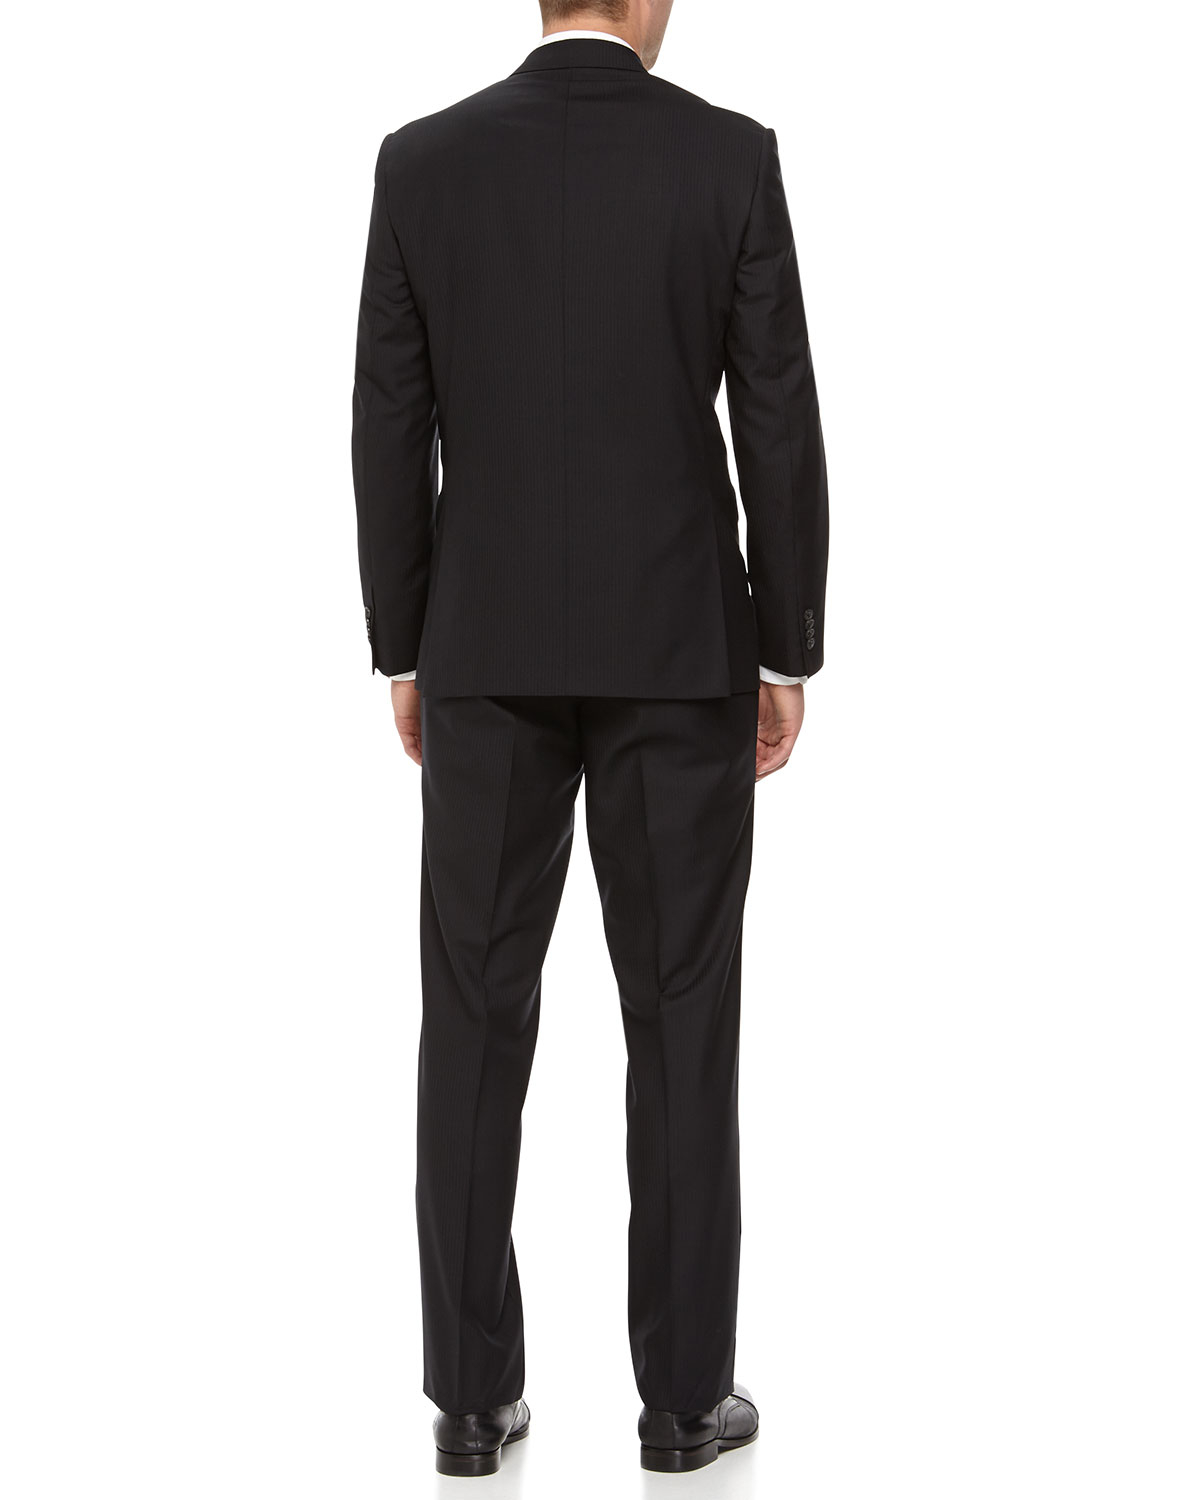 Lyst - Neiman Marcus Two-piece Ribbed Wool Suit in Black for Men